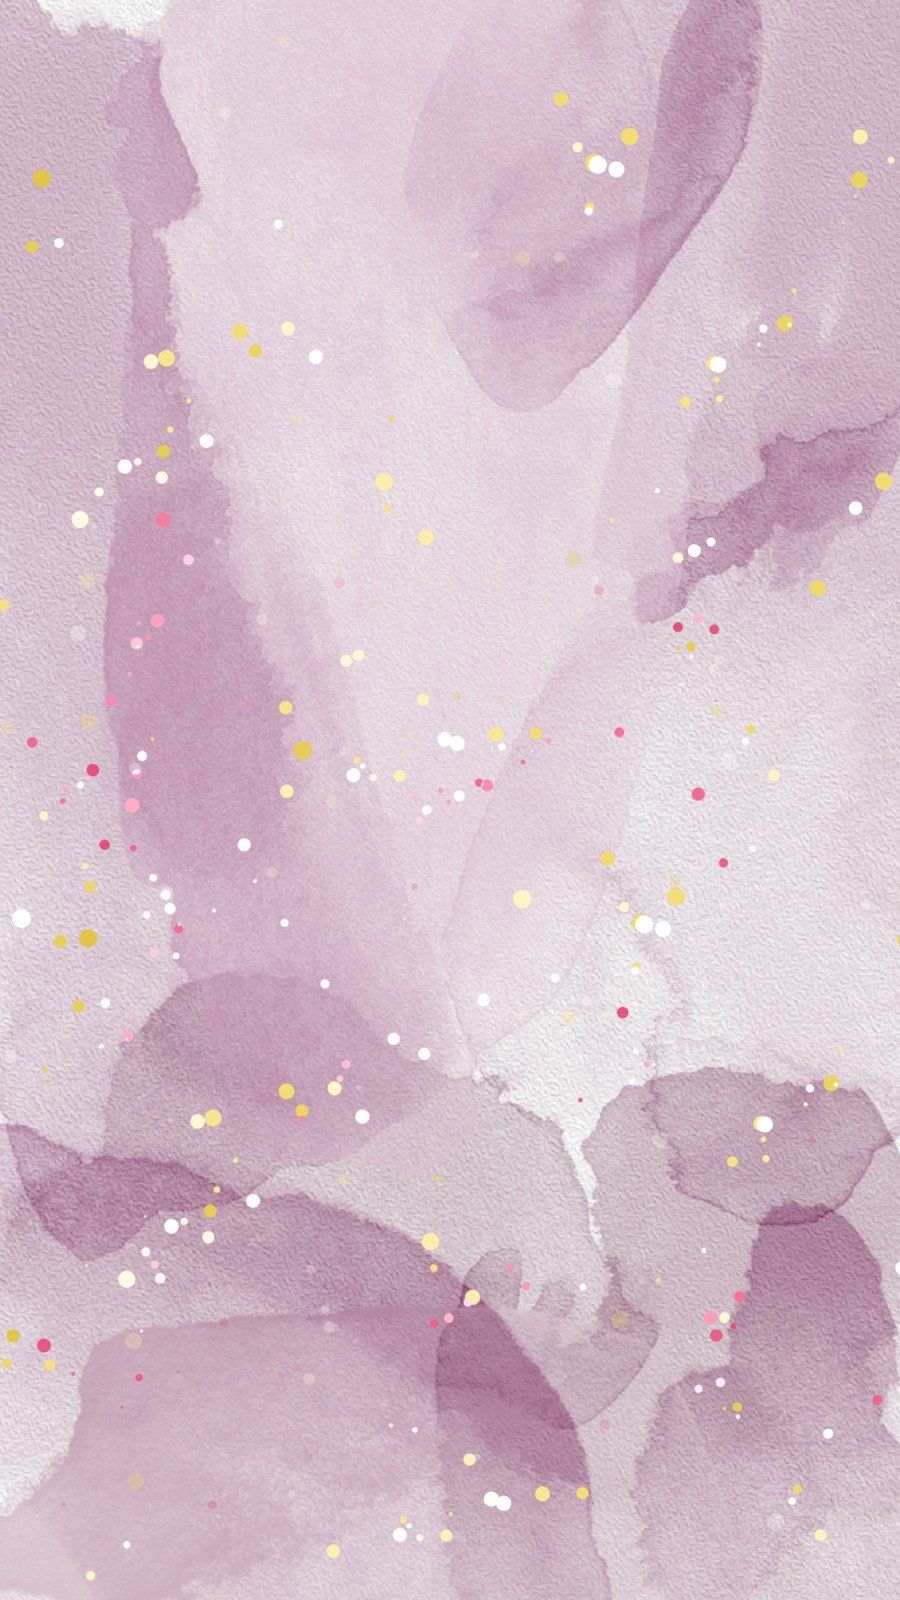 Aesthetic purple watercolor wallpaper for phone with gold and pink glitter. - Watercolor, pastel purple